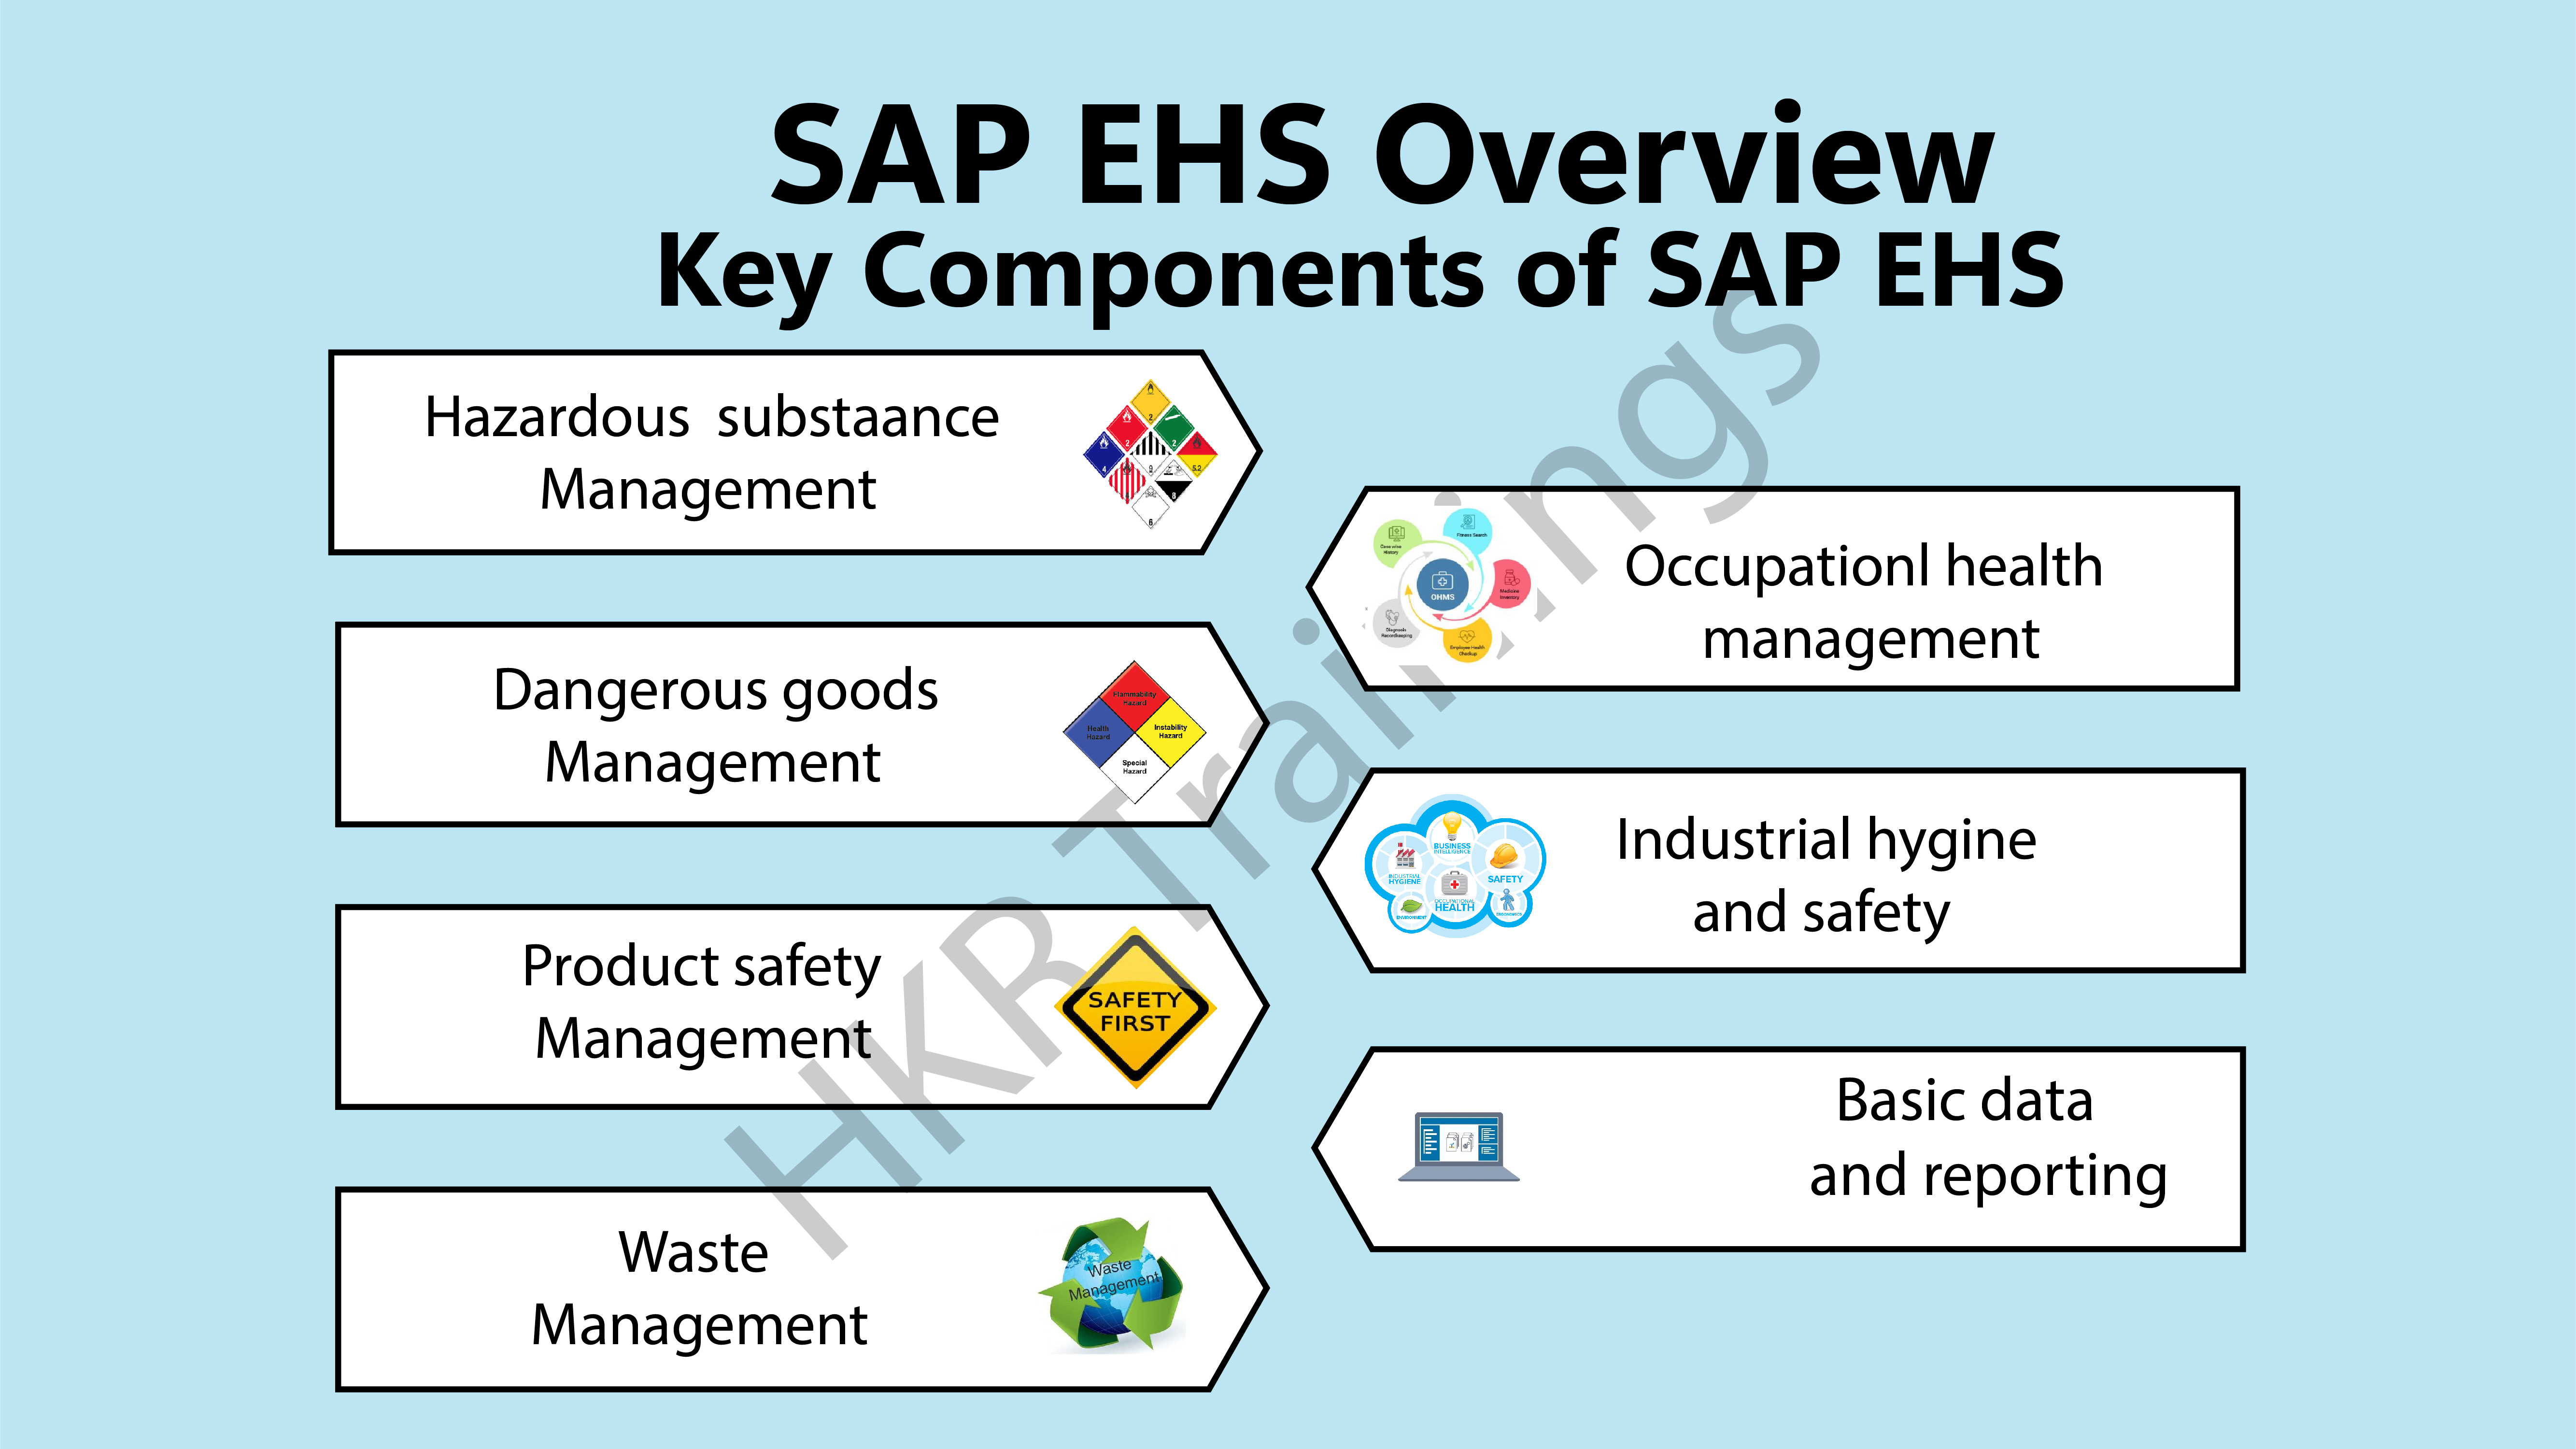 Key components of the SAP EHS